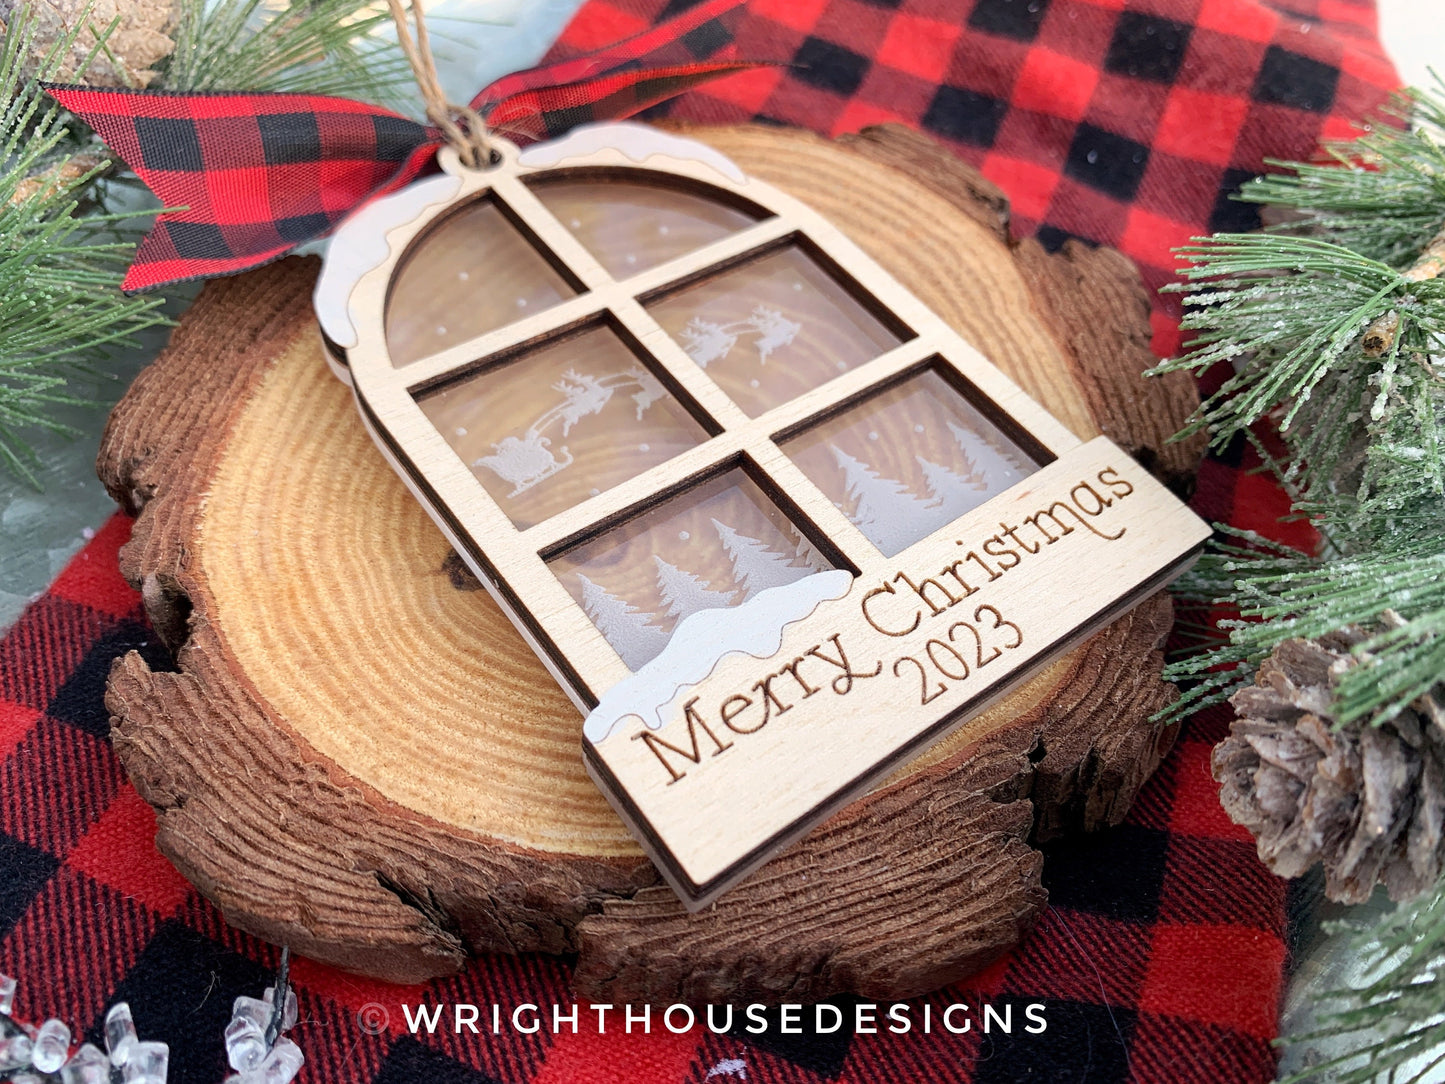 Santa Sleigh Snowy Winter Woodland Scene Ornament - Engraved Personalized Christmas Tree Ornament - Layered Wood and Acrylic Window Ornament